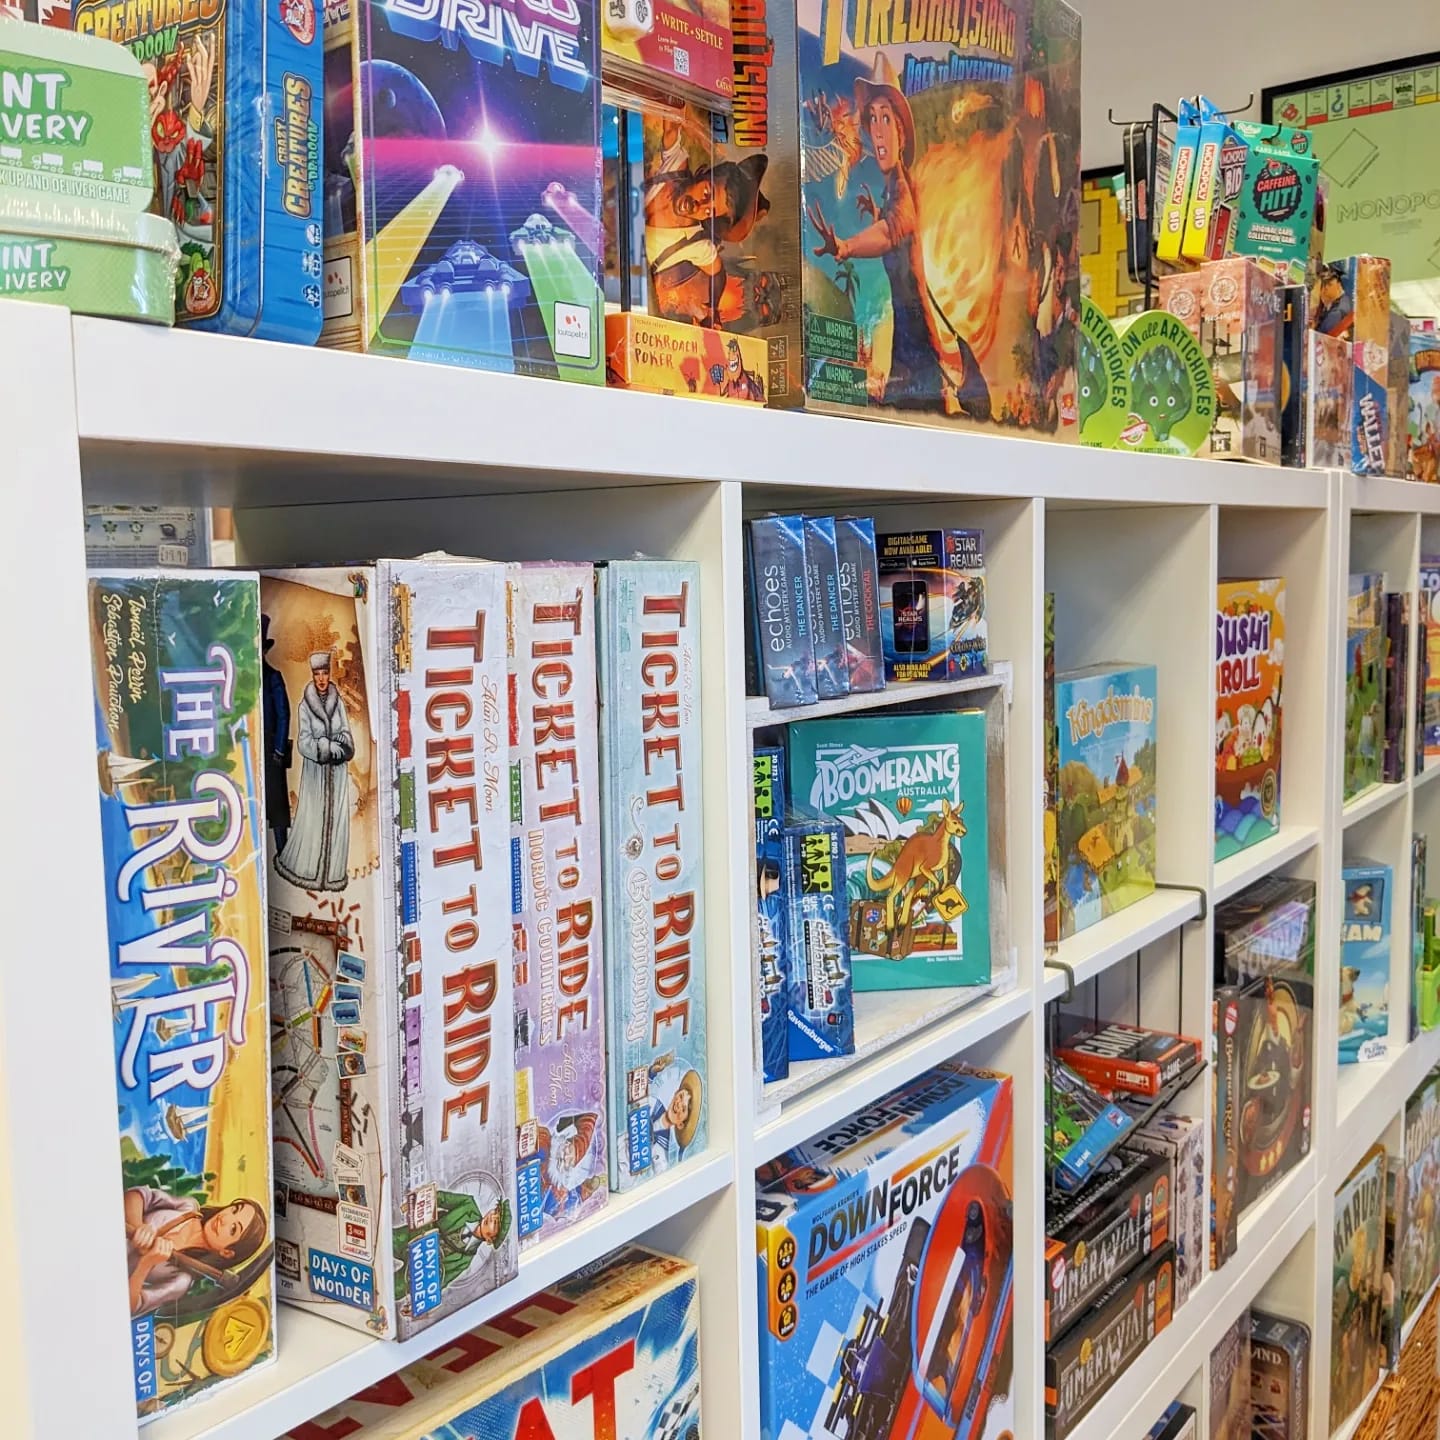 Visit us in-store at 2 Townhead Street, Strathaven, South Lanarkshire, Scotland. ML10 6AB for a great range of games and advice